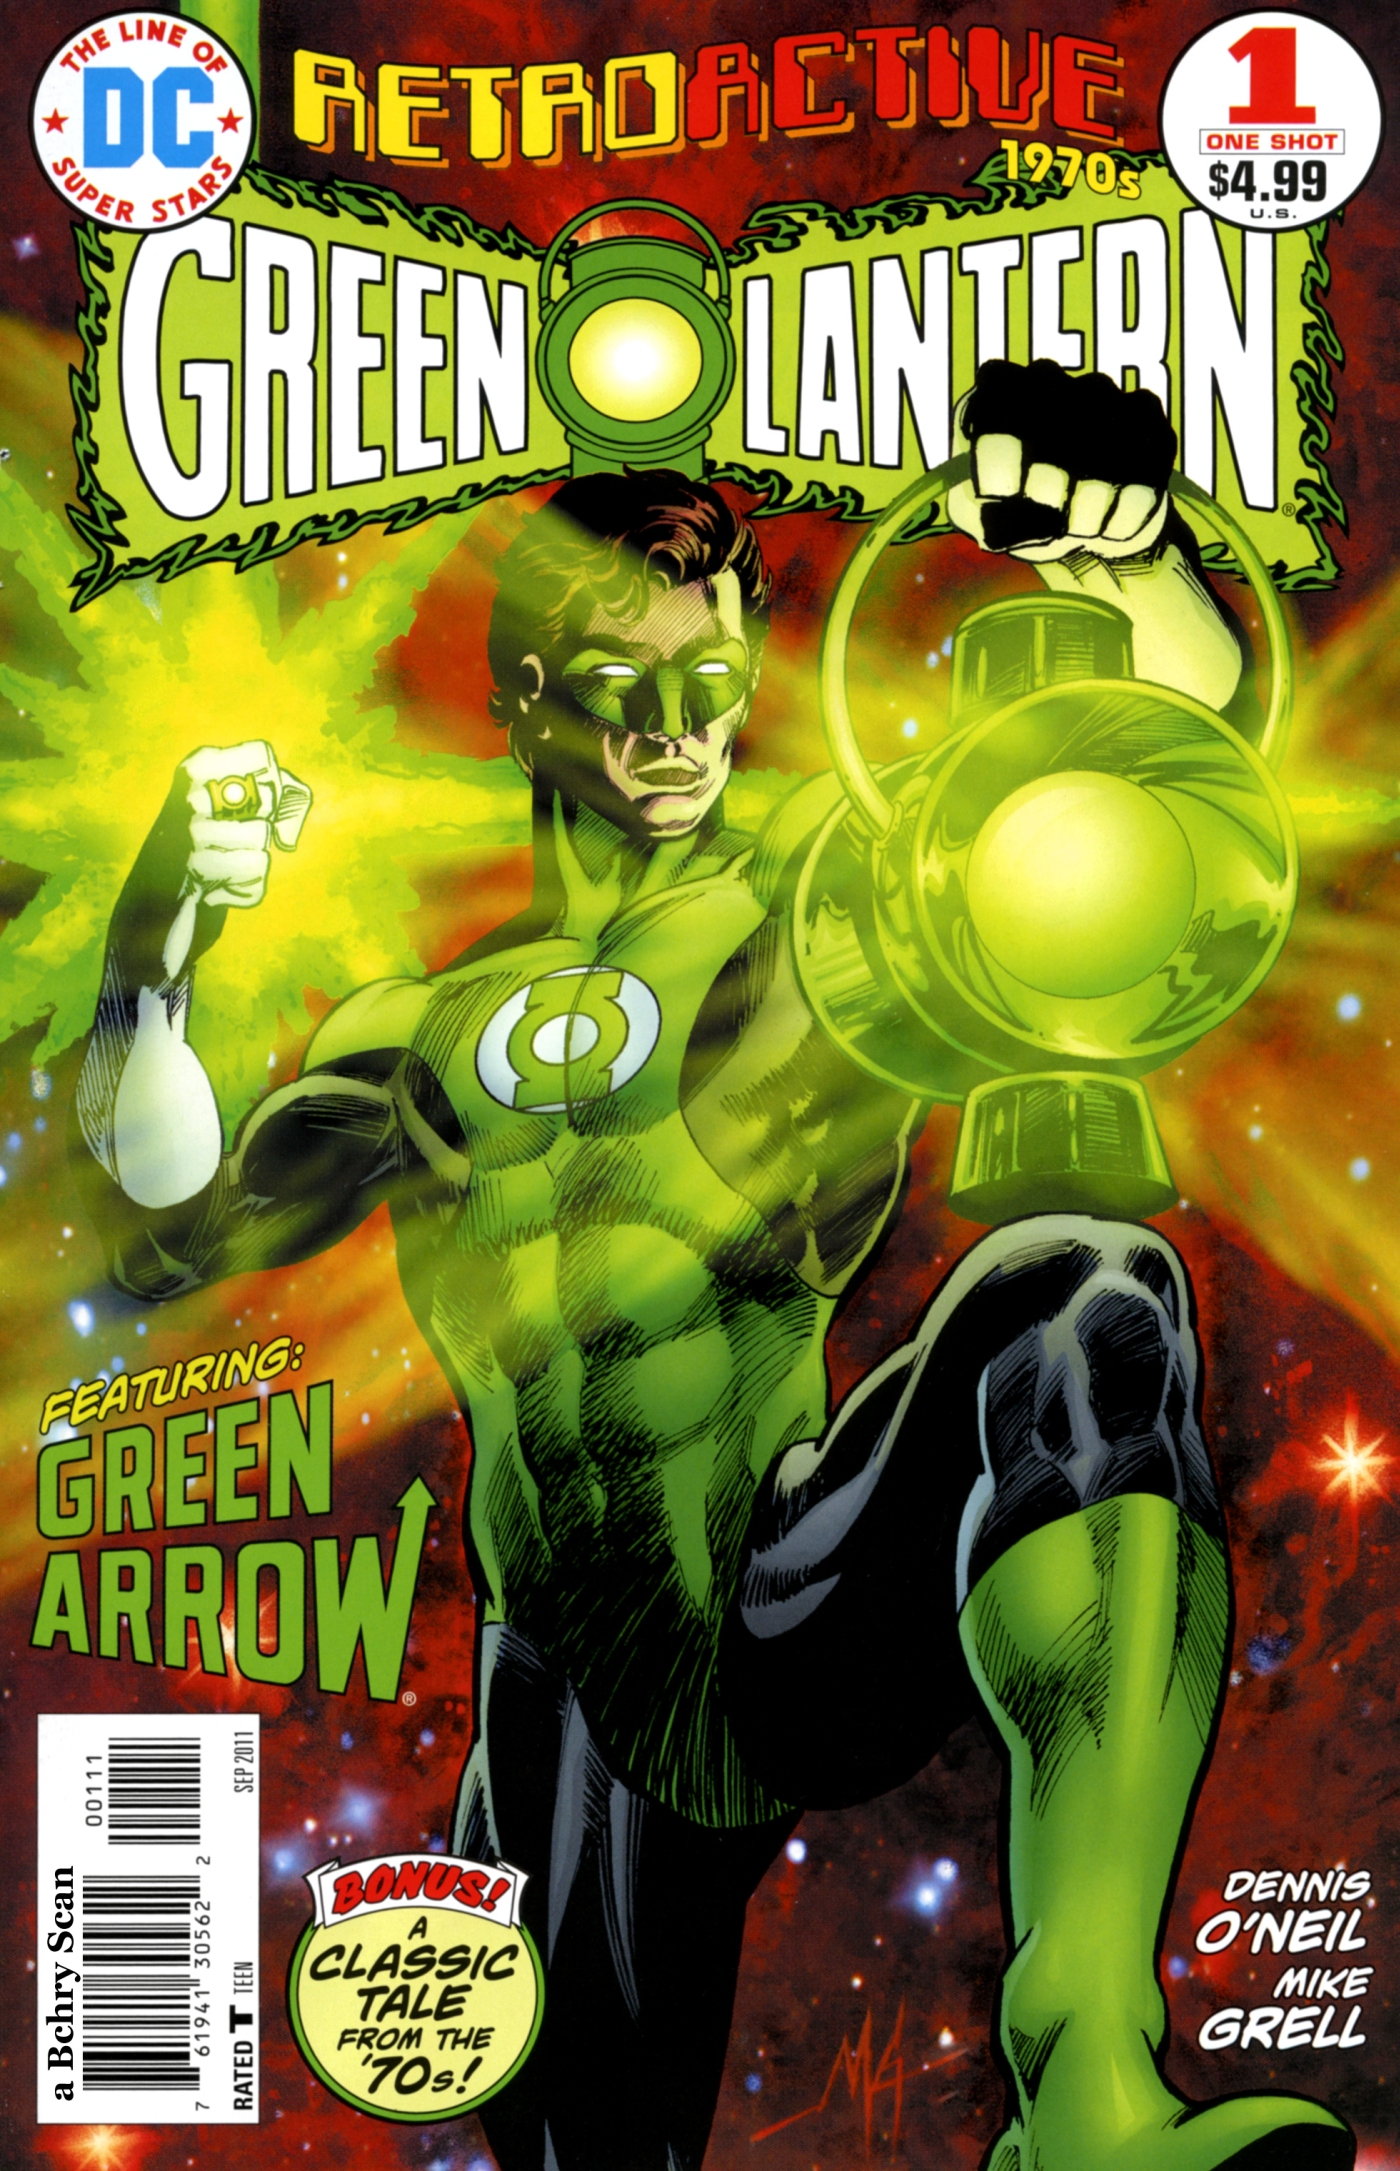 Read online DC Retroactive: Green Lantern - The '70s comic -  Issue # Full - 1